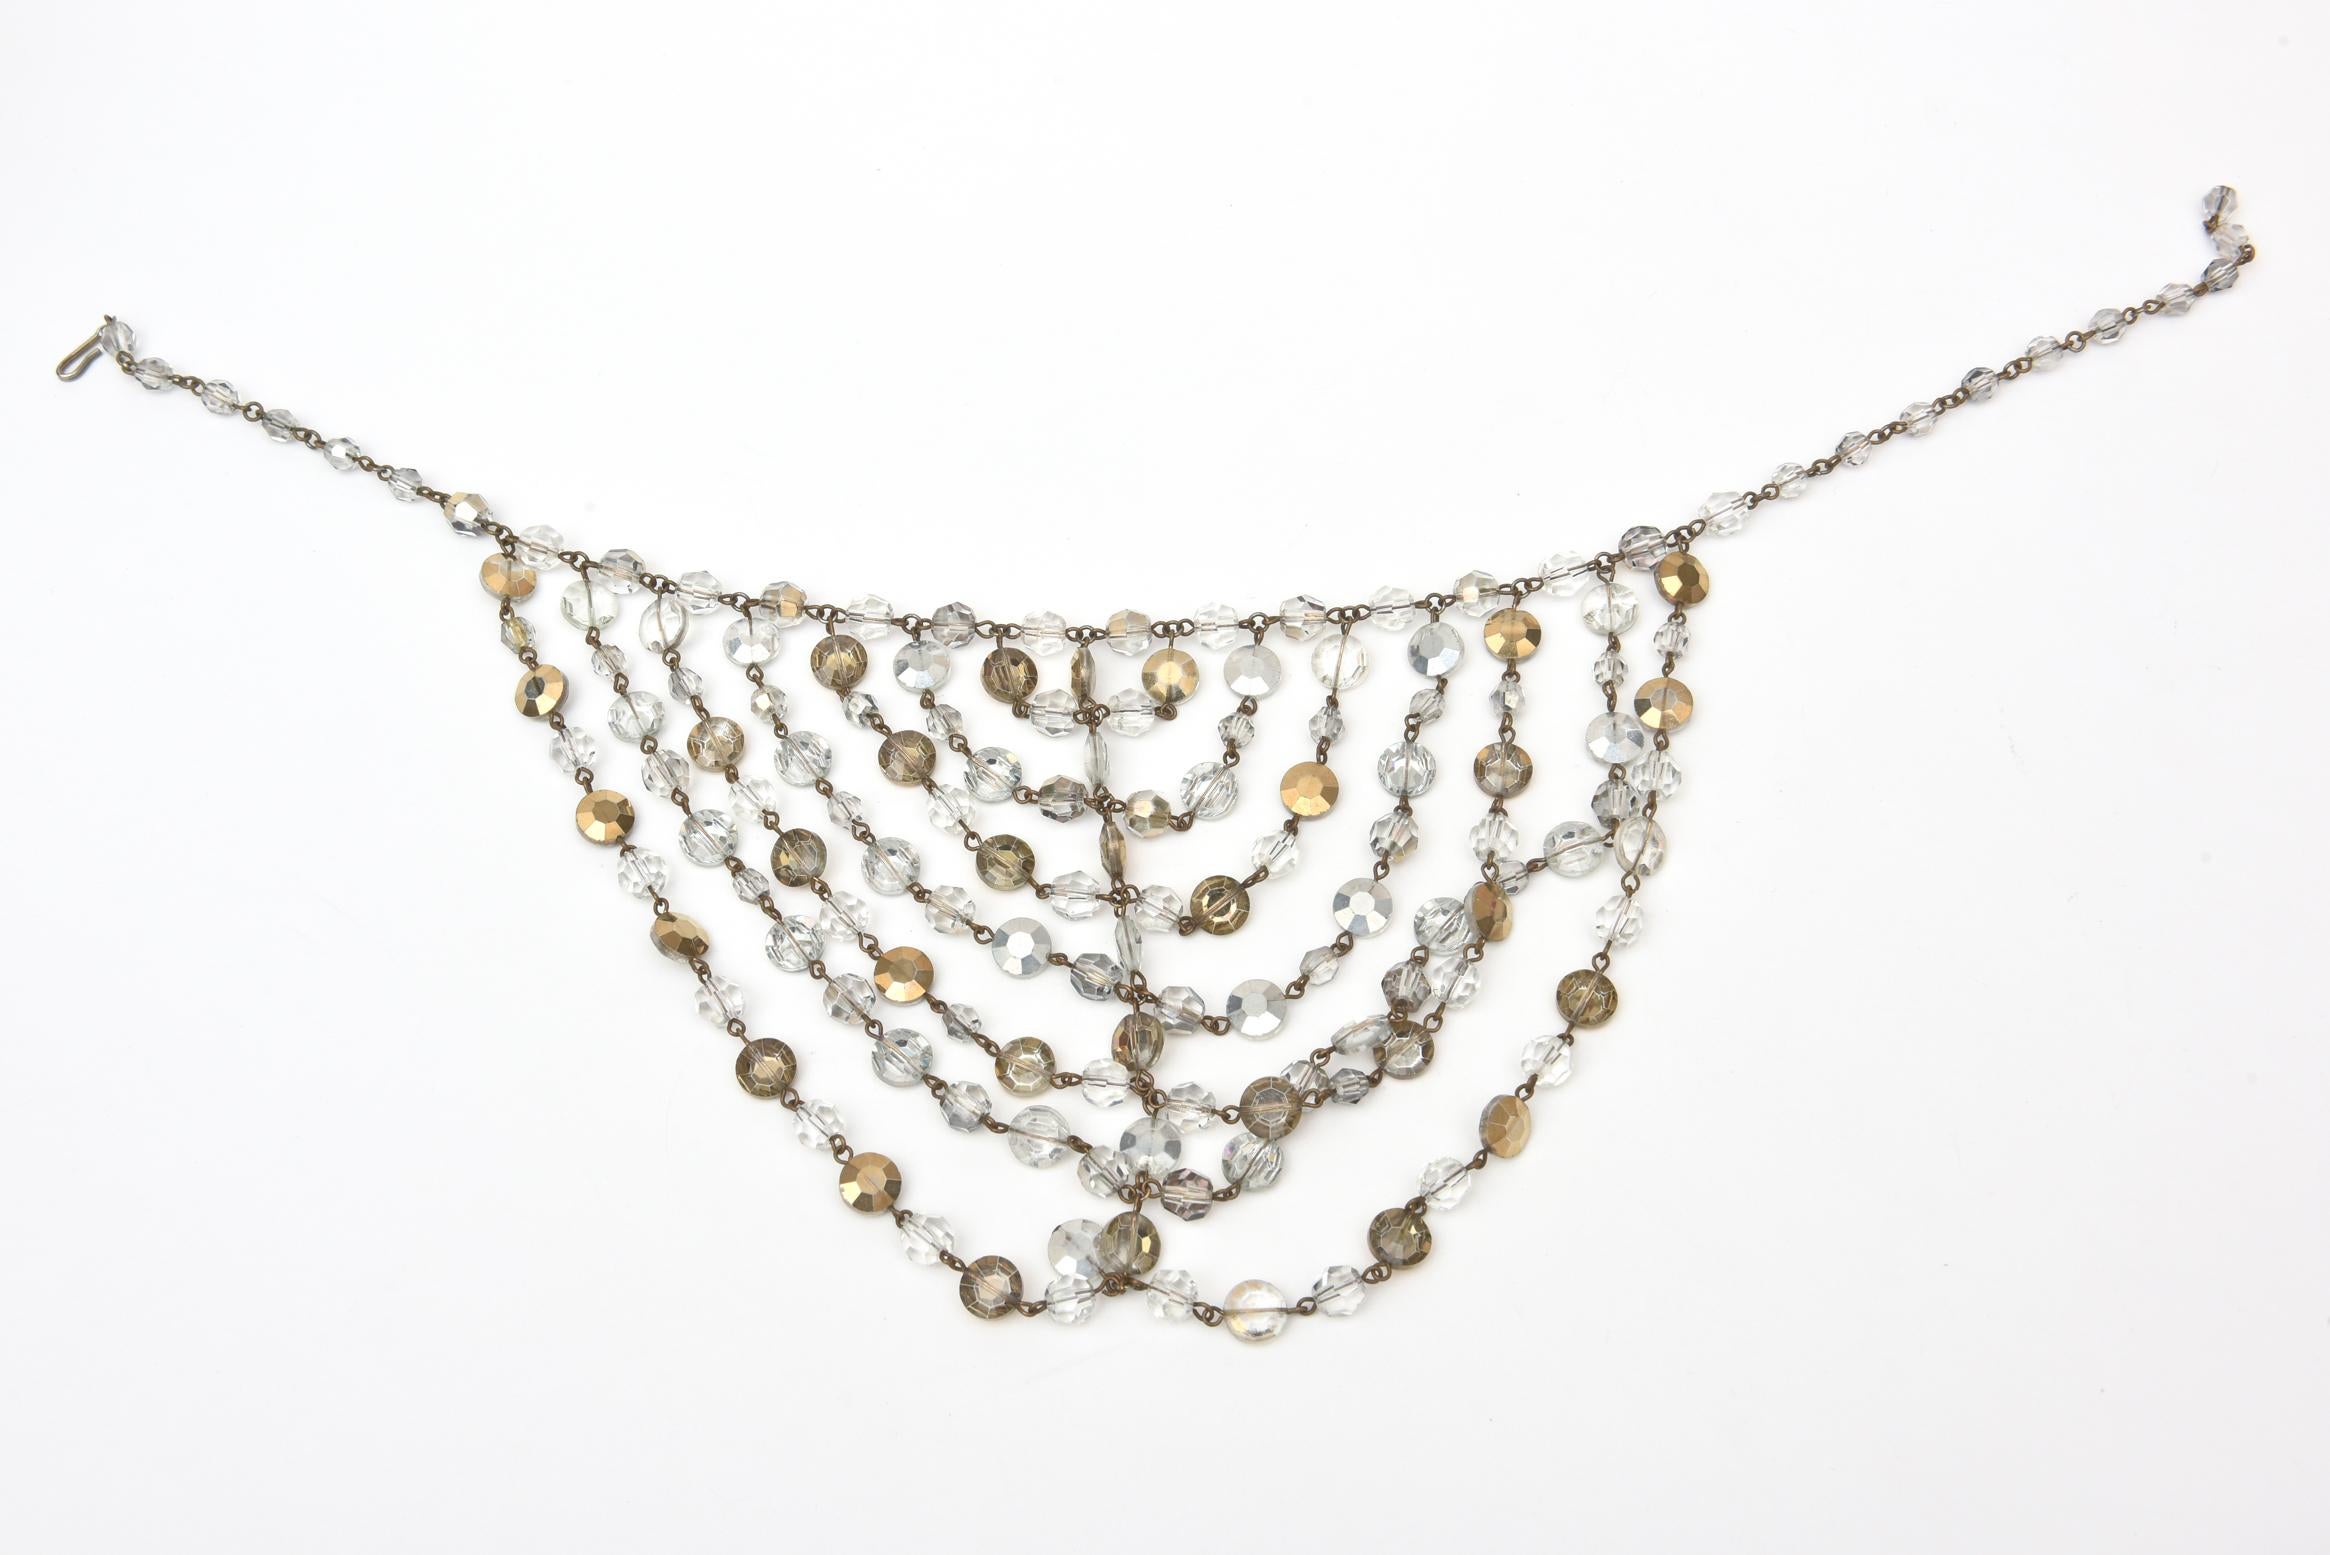 This stunning versatile vintage tiered bib necklace has layers of Austrian bevel cut crystals hanging it tiers in a bib necklace form. They are gold and clear crystals. This is a dramatic and dressy necklace on. One can make it closer or looser on